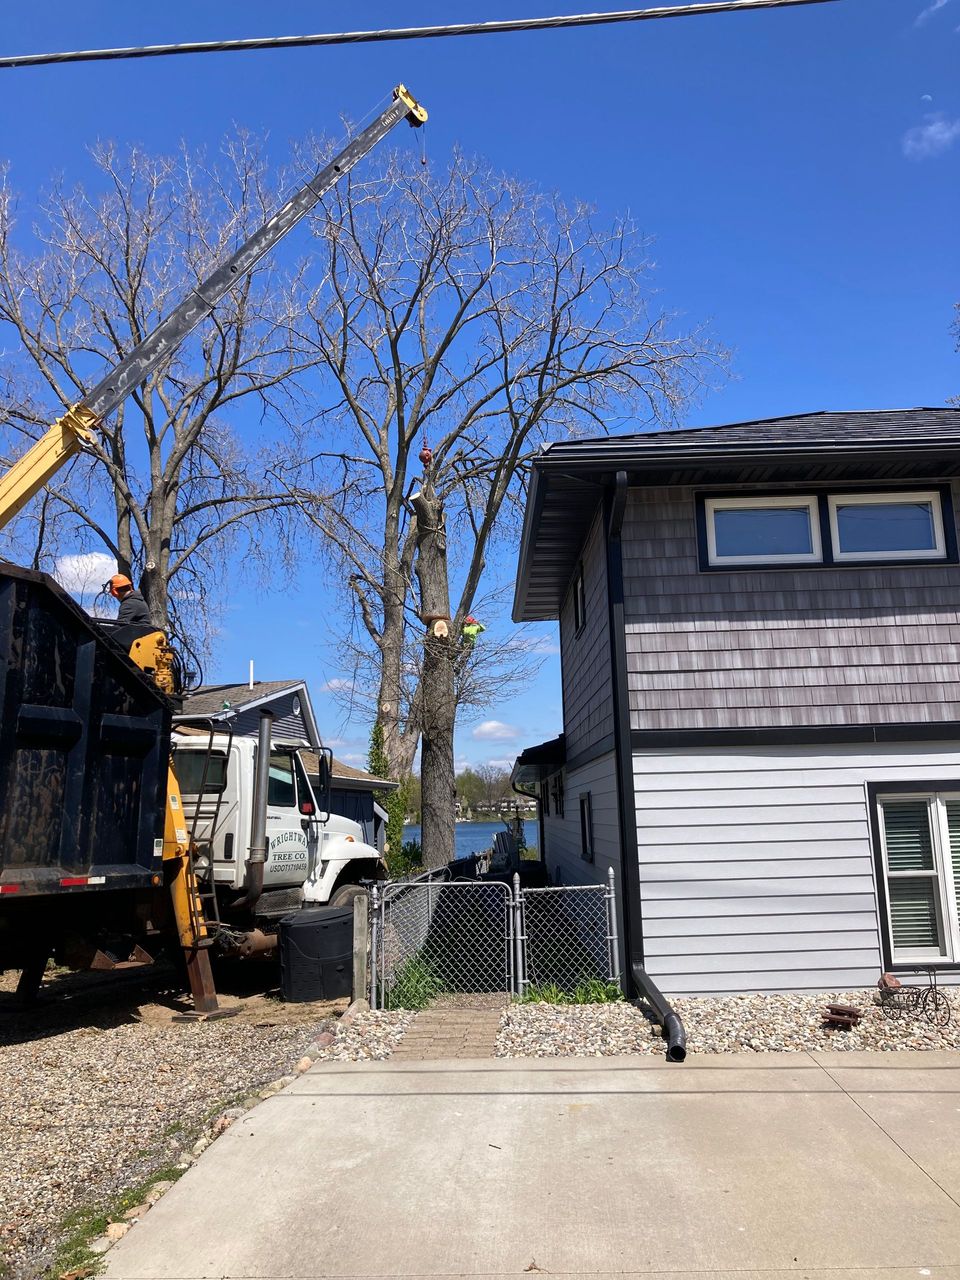 A crane is cutting a tree in front of a house.